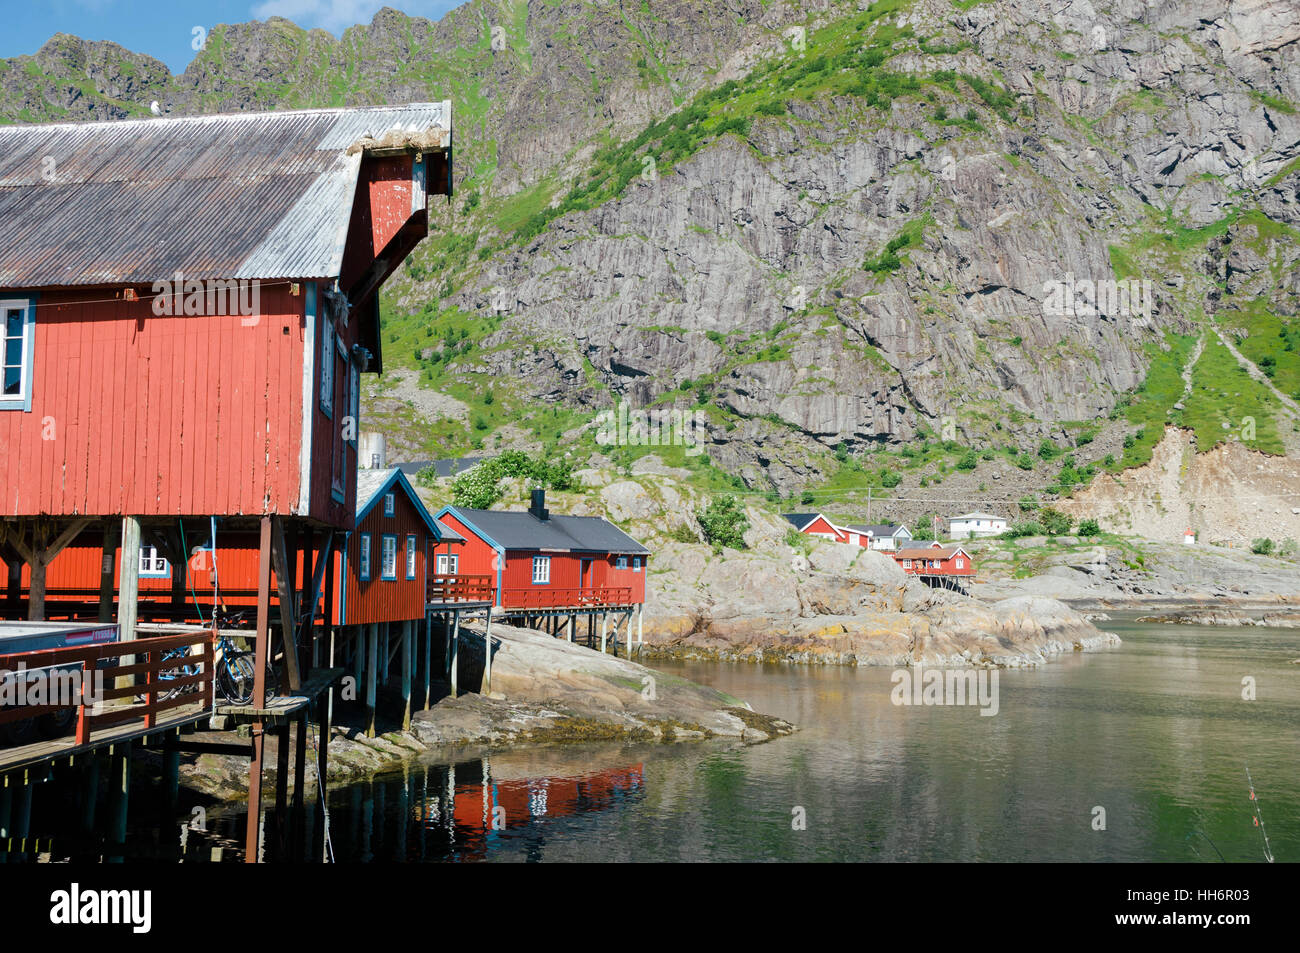 Red rorbu, traditional fishing huts, in the small fishing village of A, Moskenes, Lofoten Islands, Norway, Europe Stock Photo